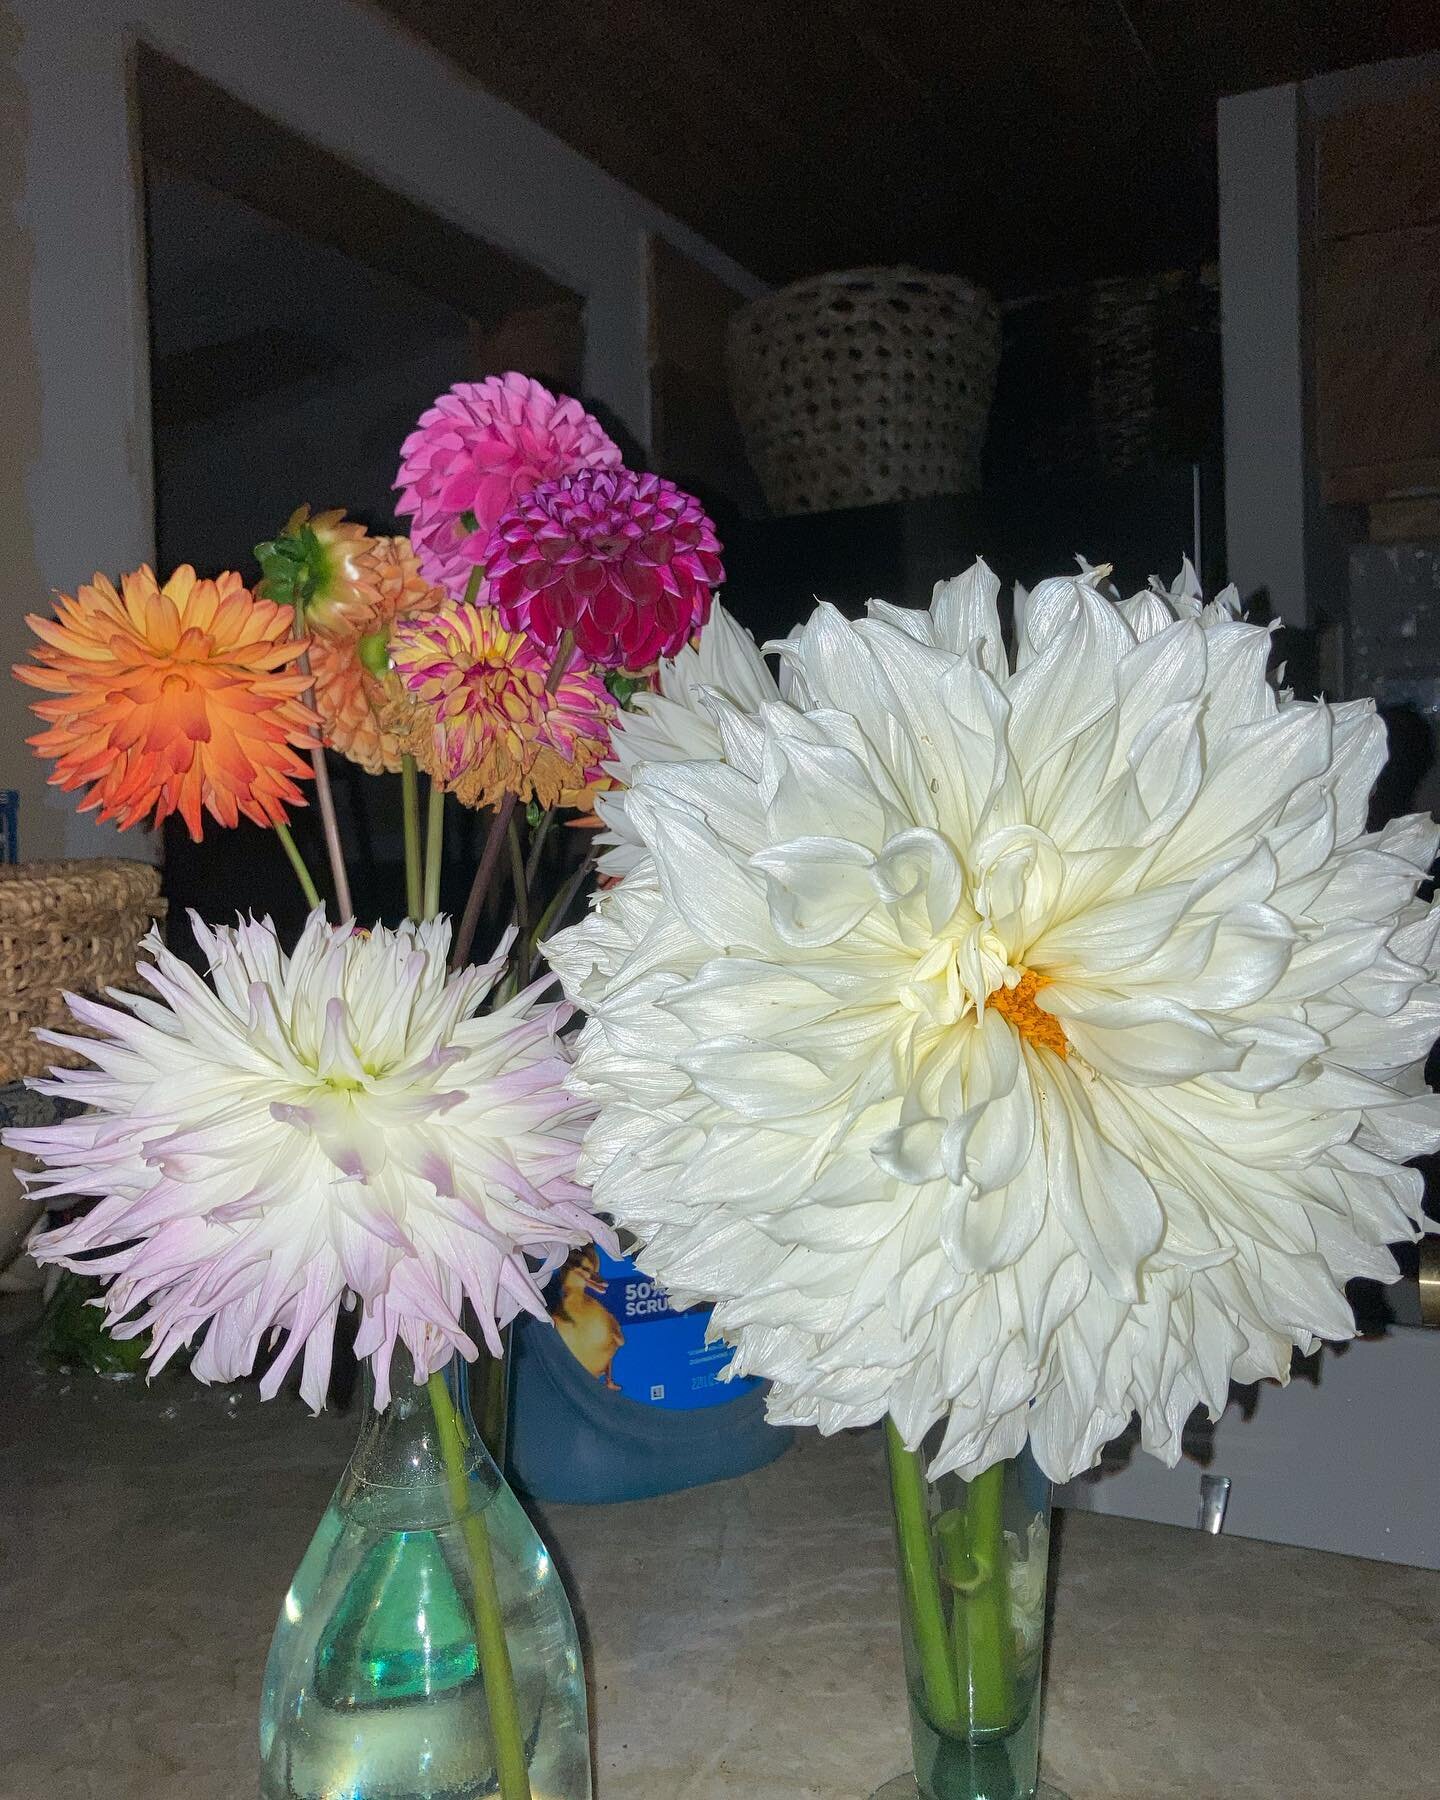 I planted my Dahlias late this year and with our dry summer and my lack of tending, they still did not disappoint! 🥰 And yes, there&rsquo;s a big bottle of Dawn in the background! #slowlivinginspiration #dahlia #farmingjoy #flowers #atcobblestonefar